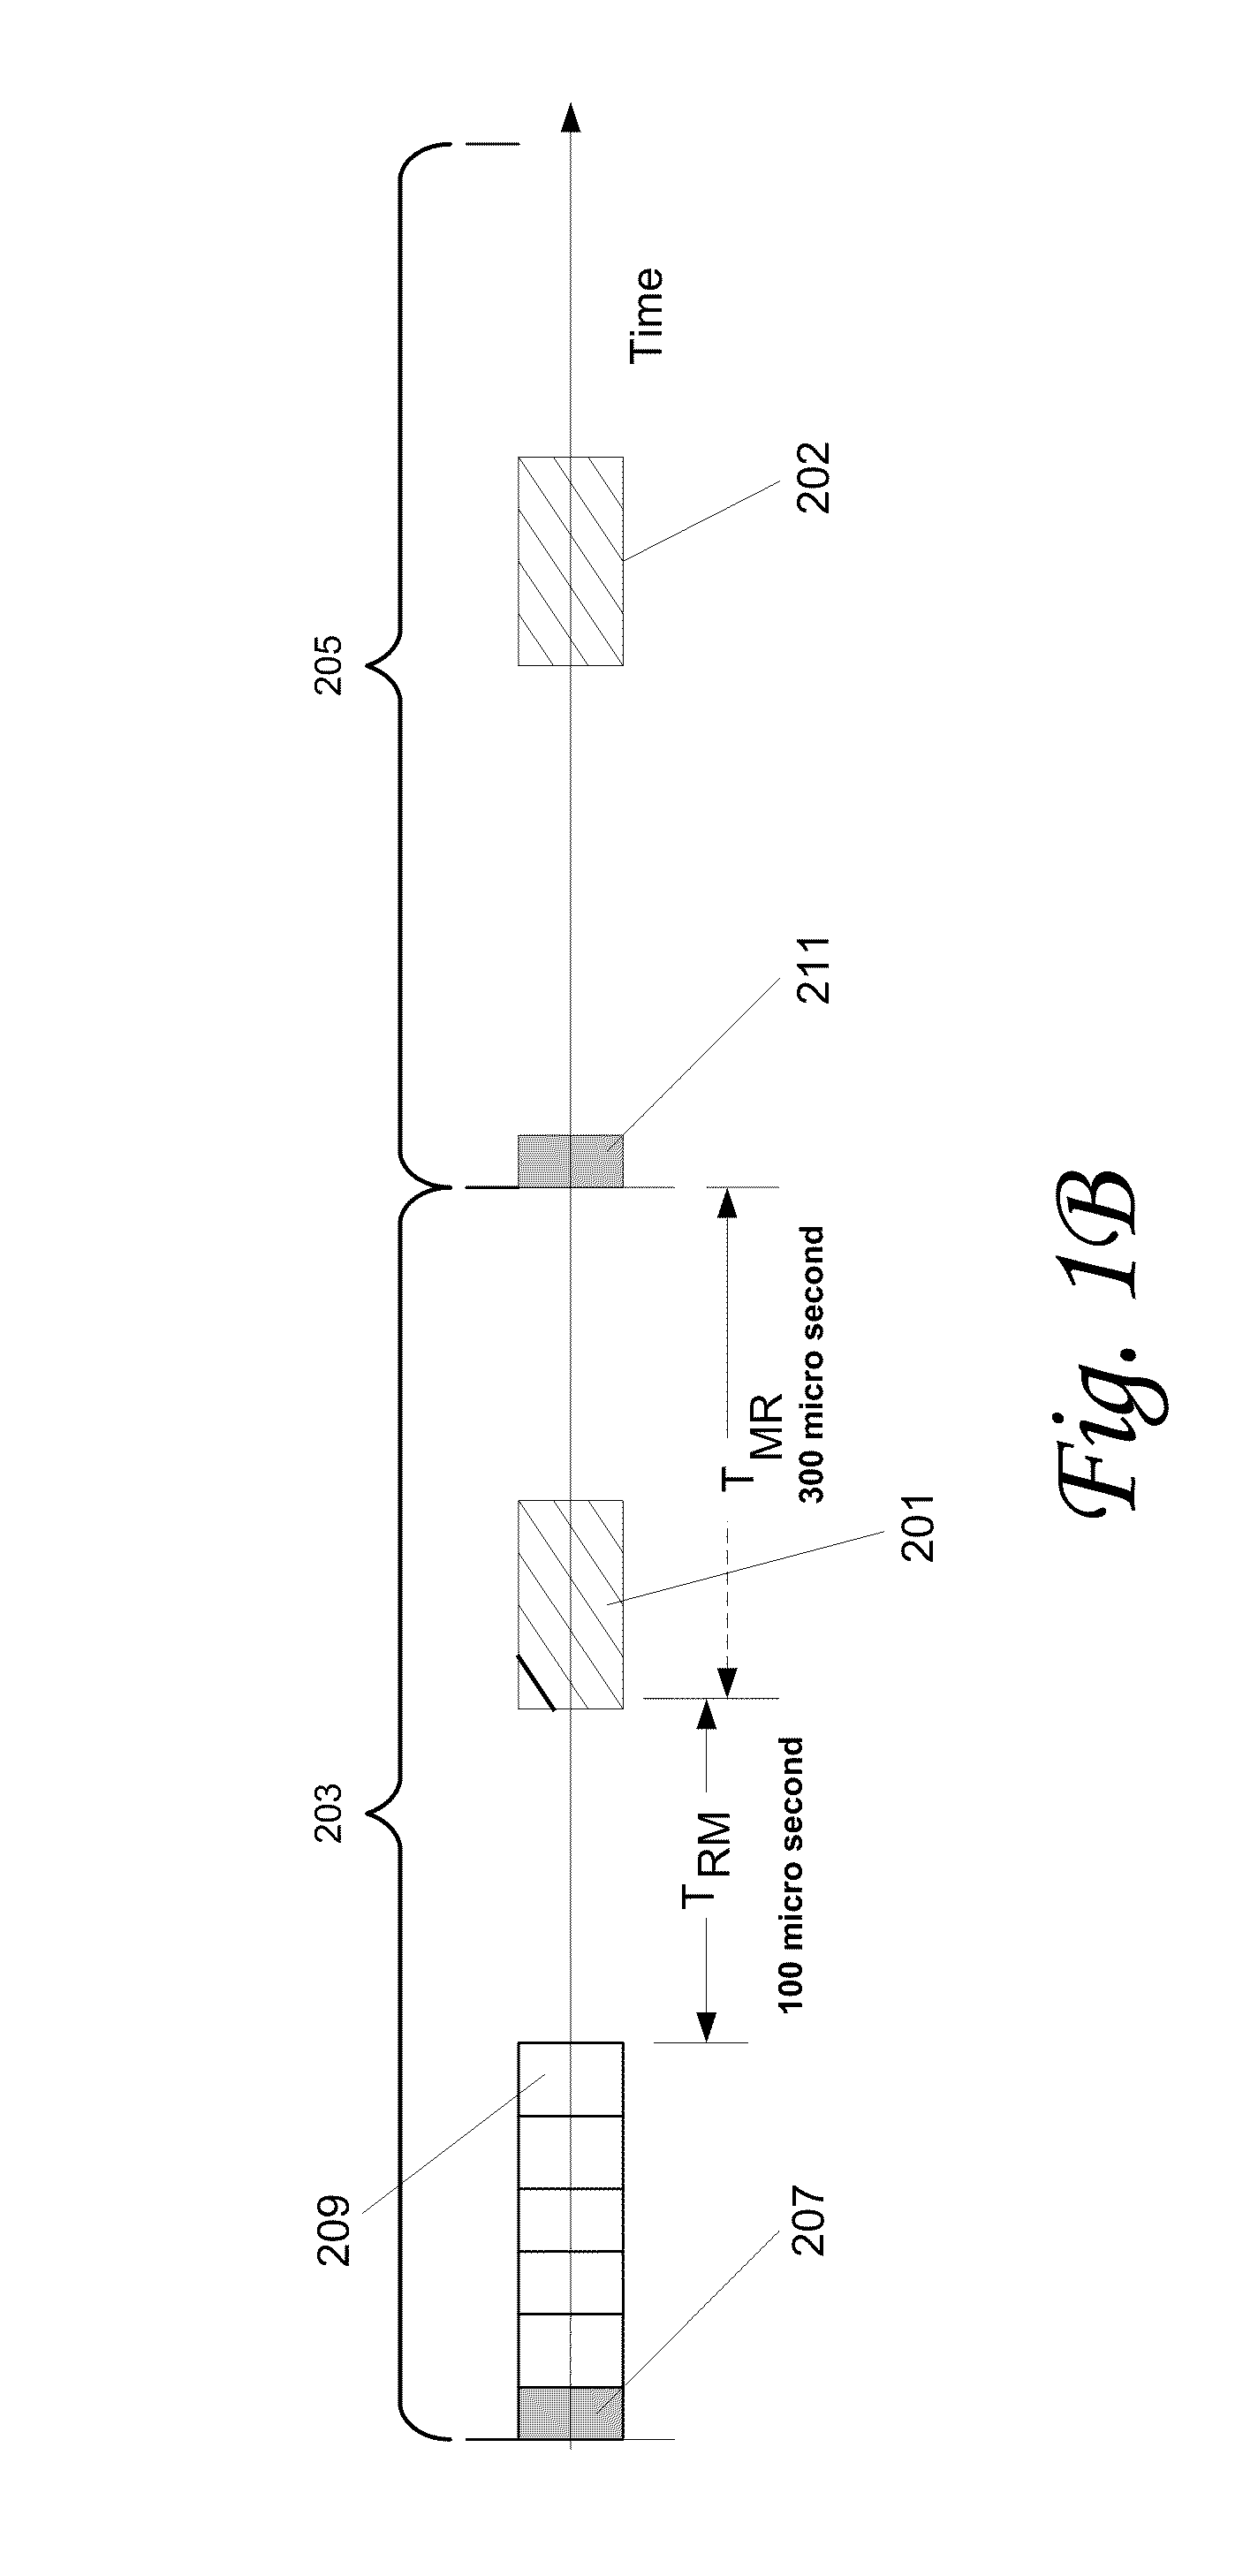 Flexible Reservation Request and Scheduling Mechanisms in a Managed Shared Network with Quality of Service